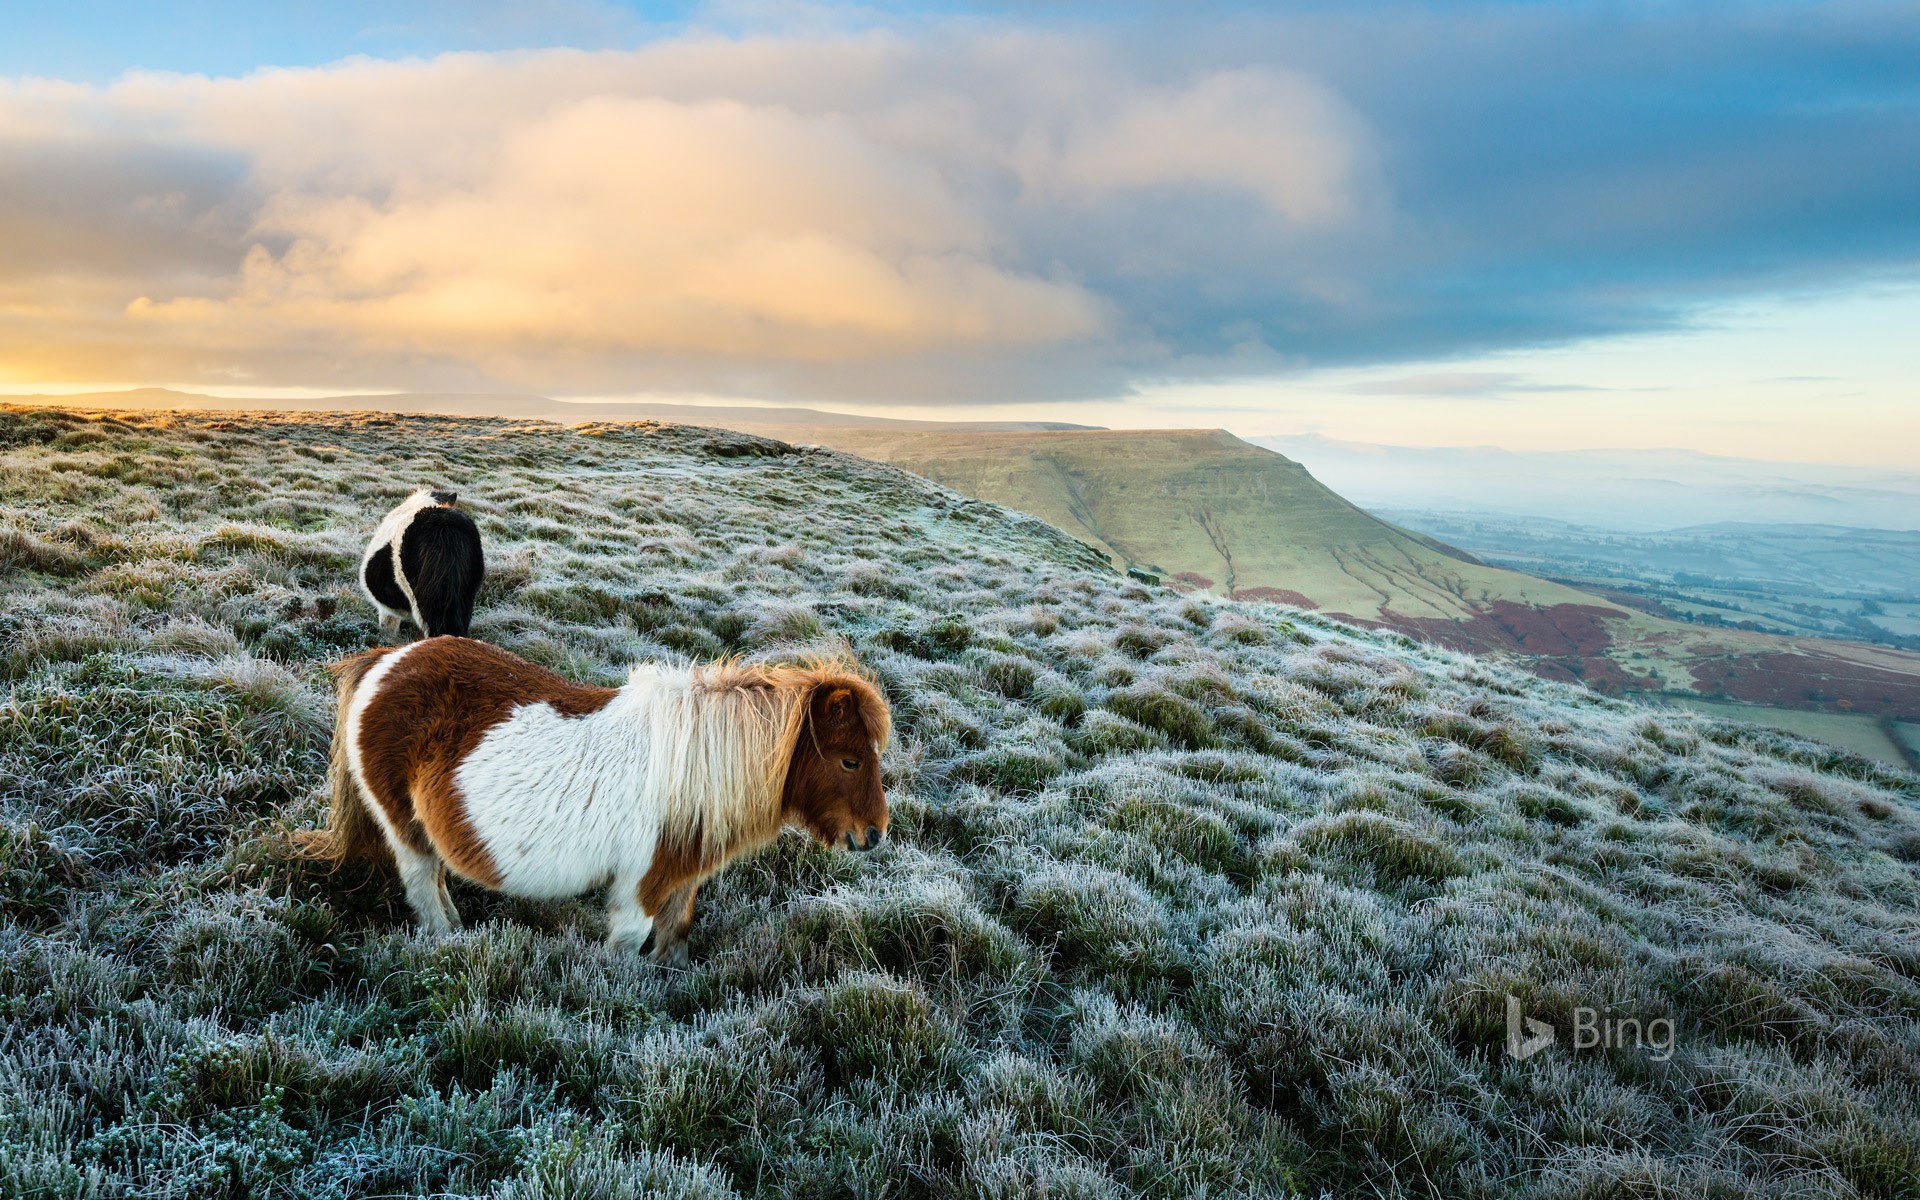 Wild ponies at Hay Bluff, Black Mountains, Brecon Beacons National Park, Wales